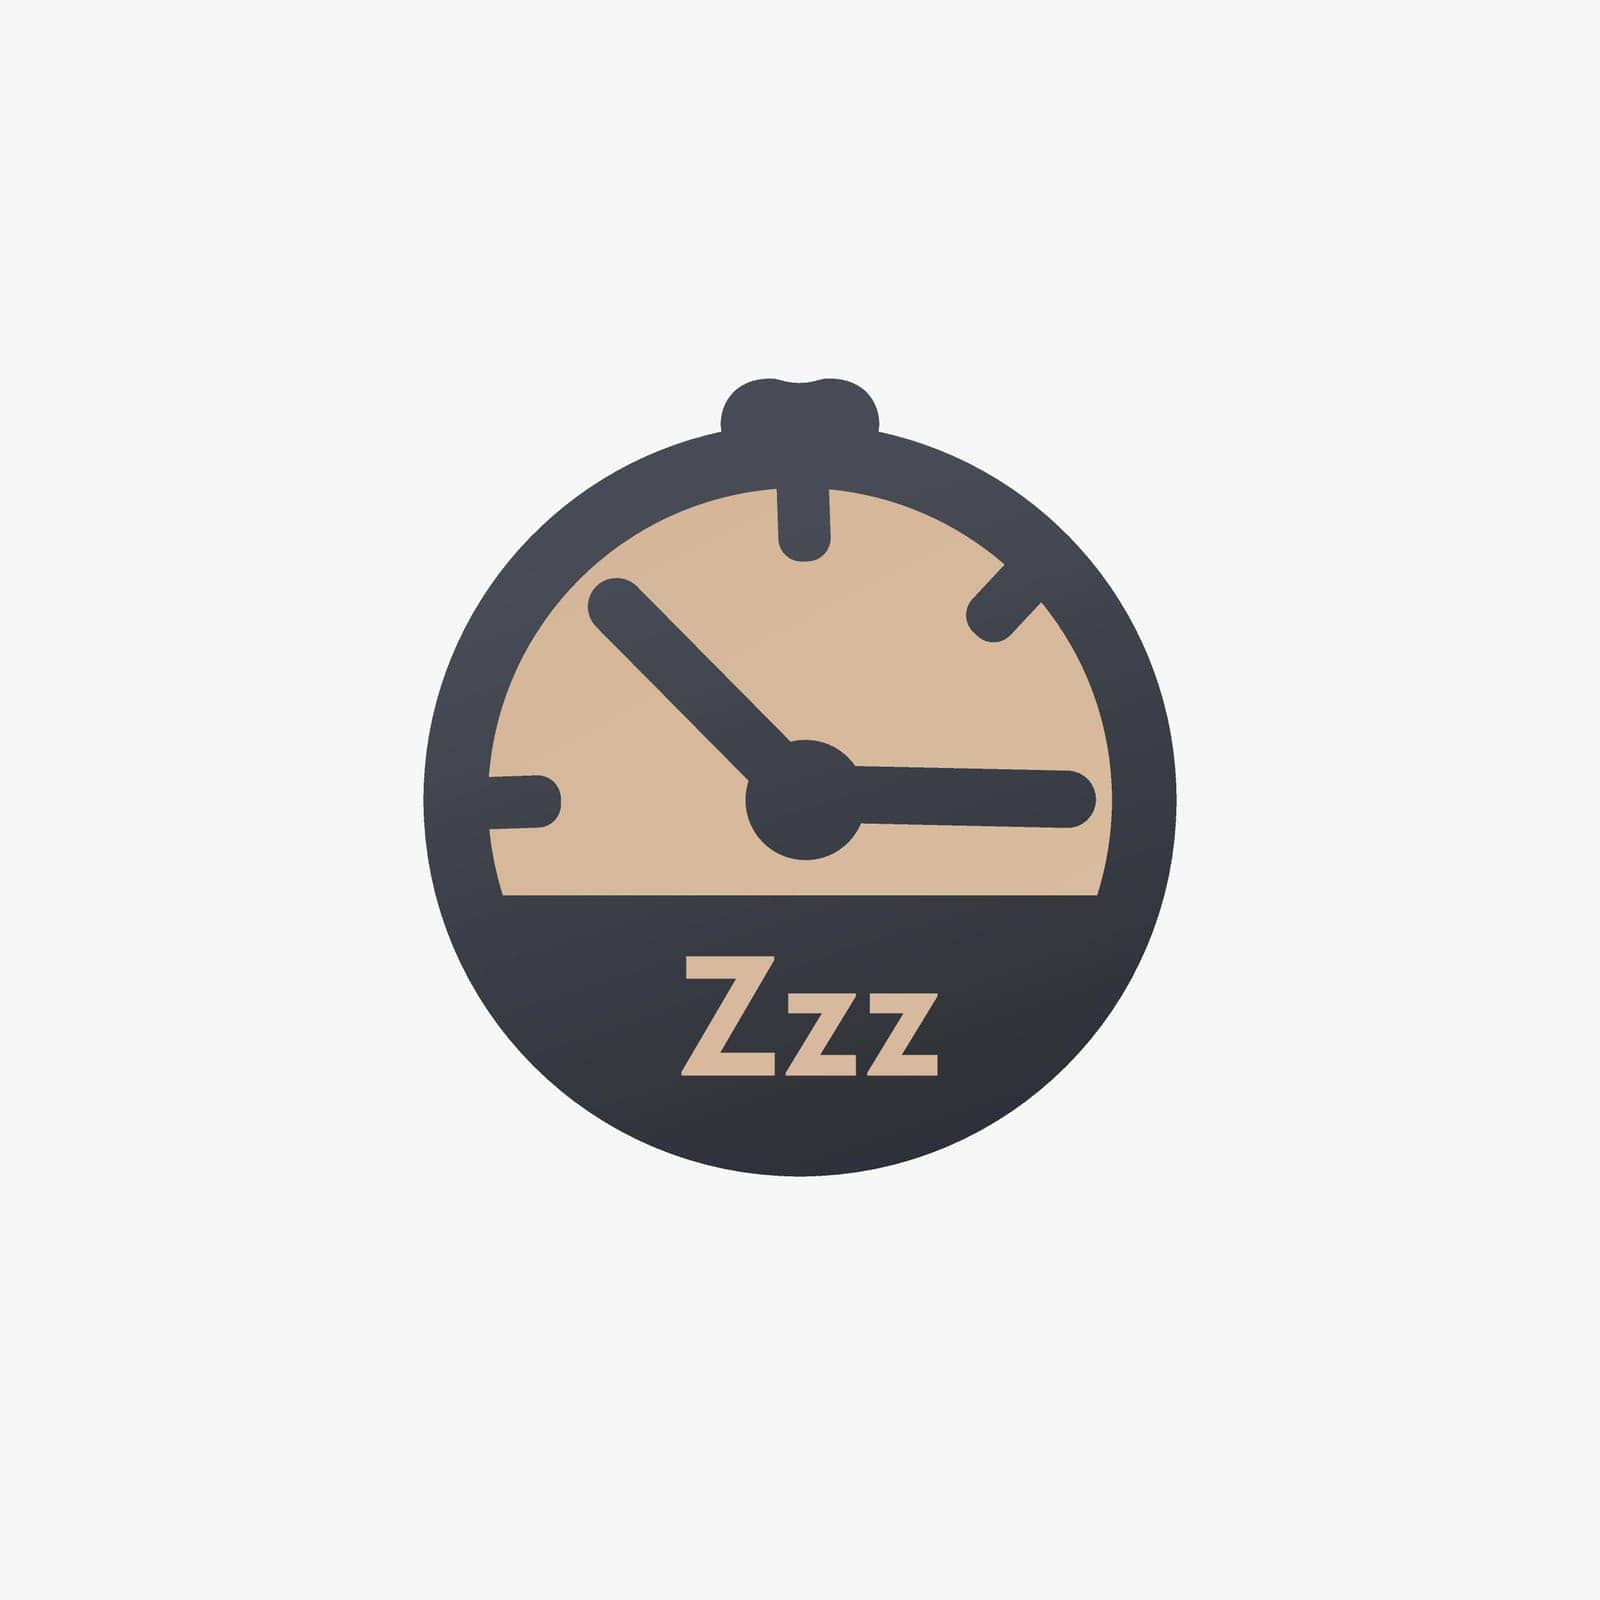 Clock Sleep Icon. Time to sleep, time to go to bed symbol. Stock vector illustration isolated on white background. by Kyrylov